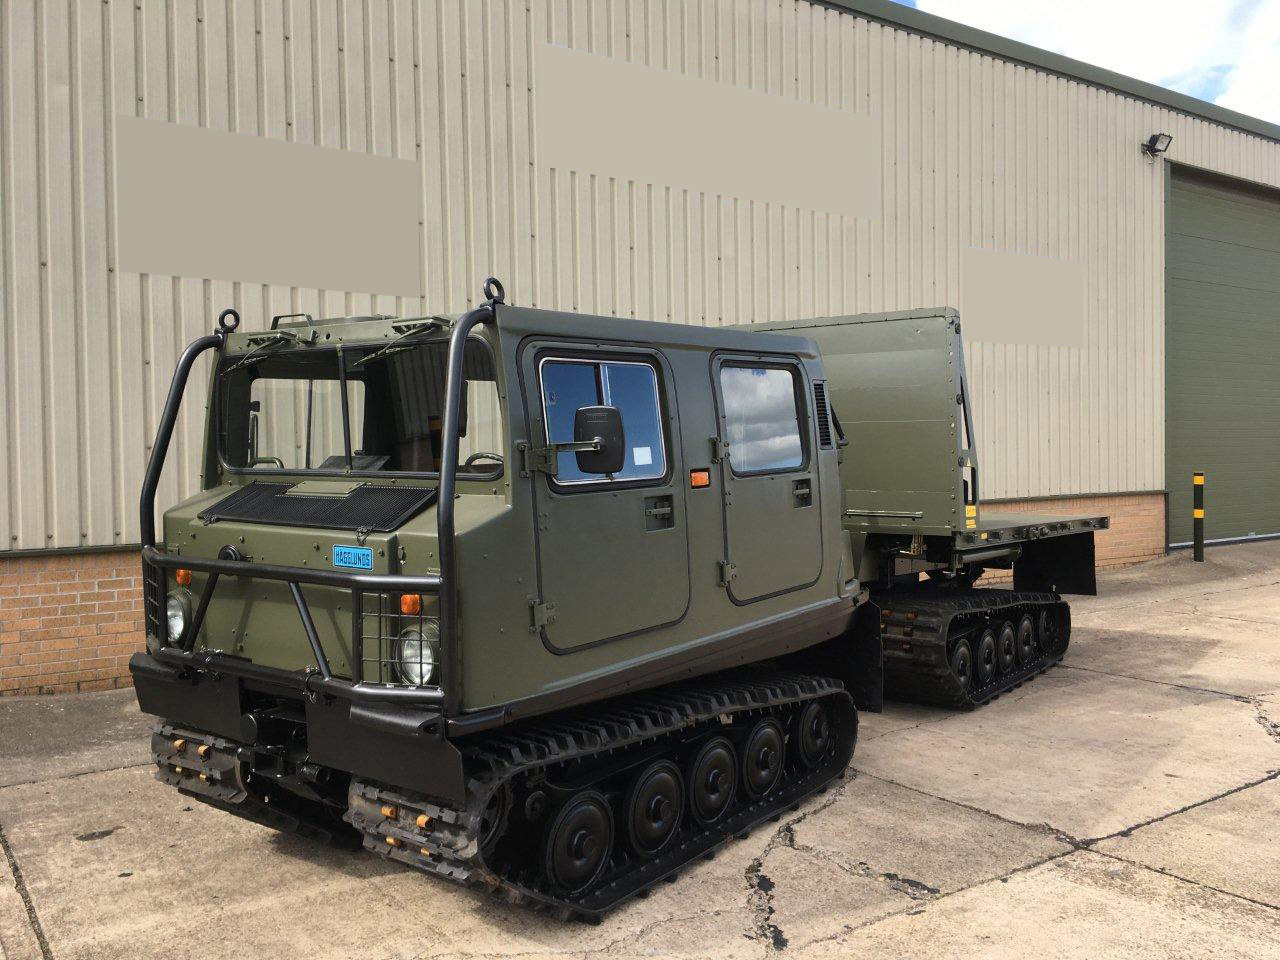 <a href='/index.php/main-menu-stock/drivetrain/tracked/50303-hagglunds-bv206-load-carrier-with-crane-50303' title='Read more...' class='joodb_titletink'>Hagglunds Bv206 Load Carrier with Crane - 50303</a>